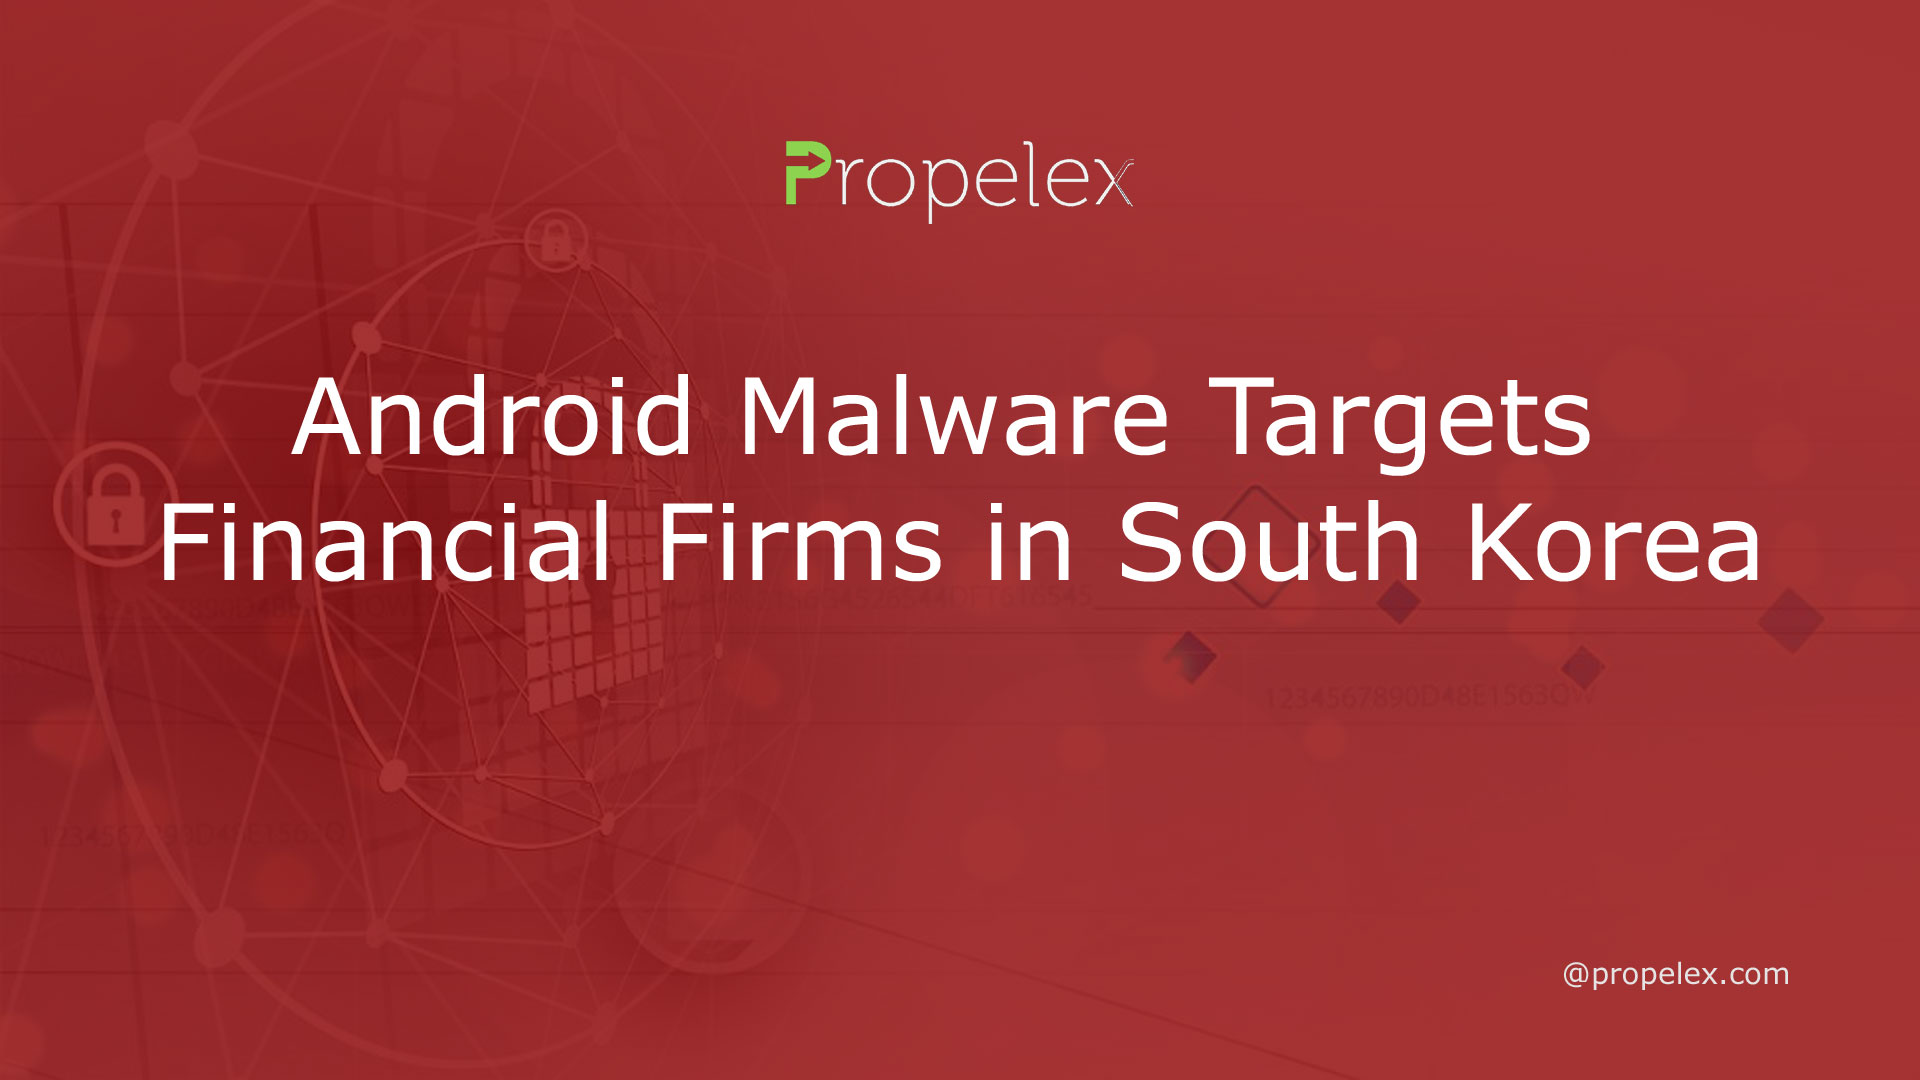 Android Malware Targets Financial Firms in South Korea